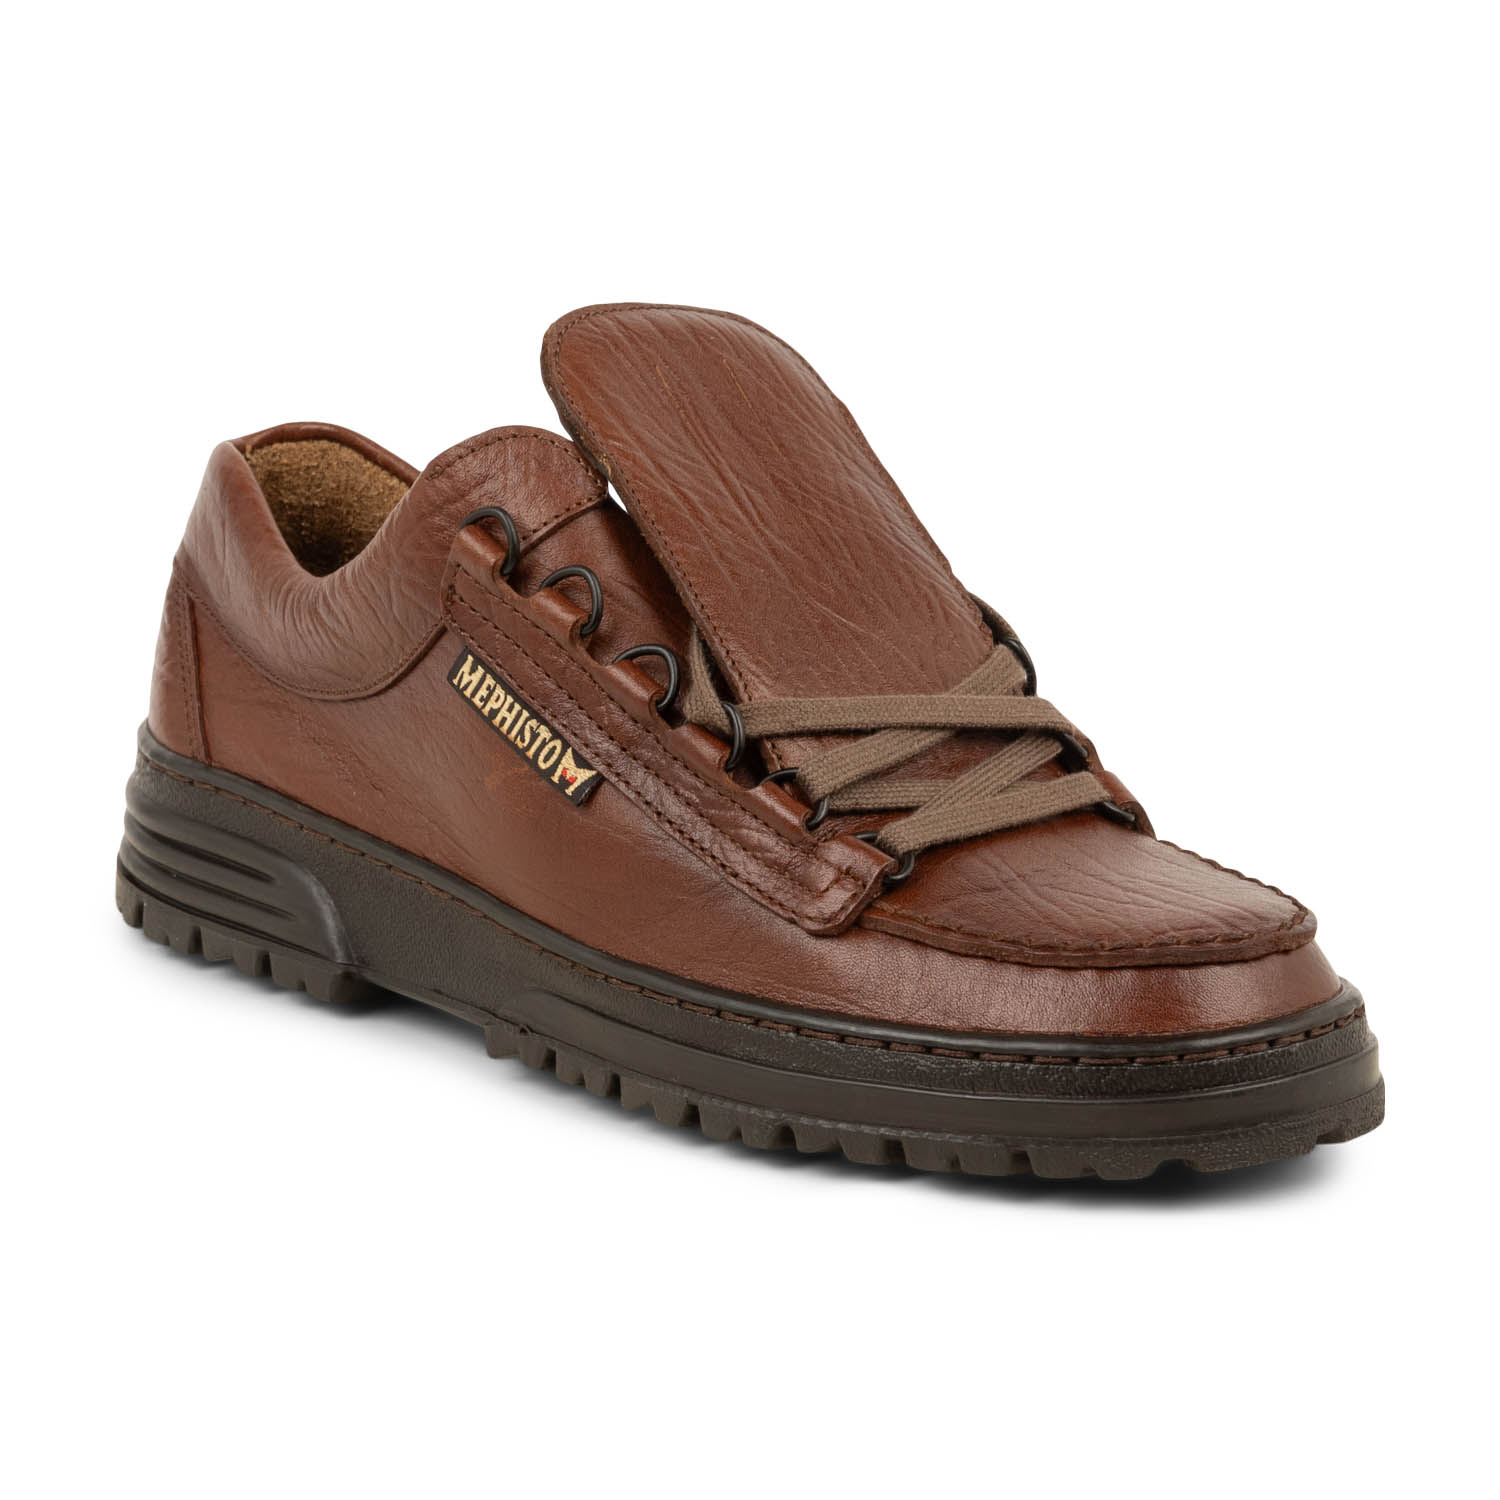 02 - CRUISER - MEPHISTO - Chaussures à lacets - Cuir